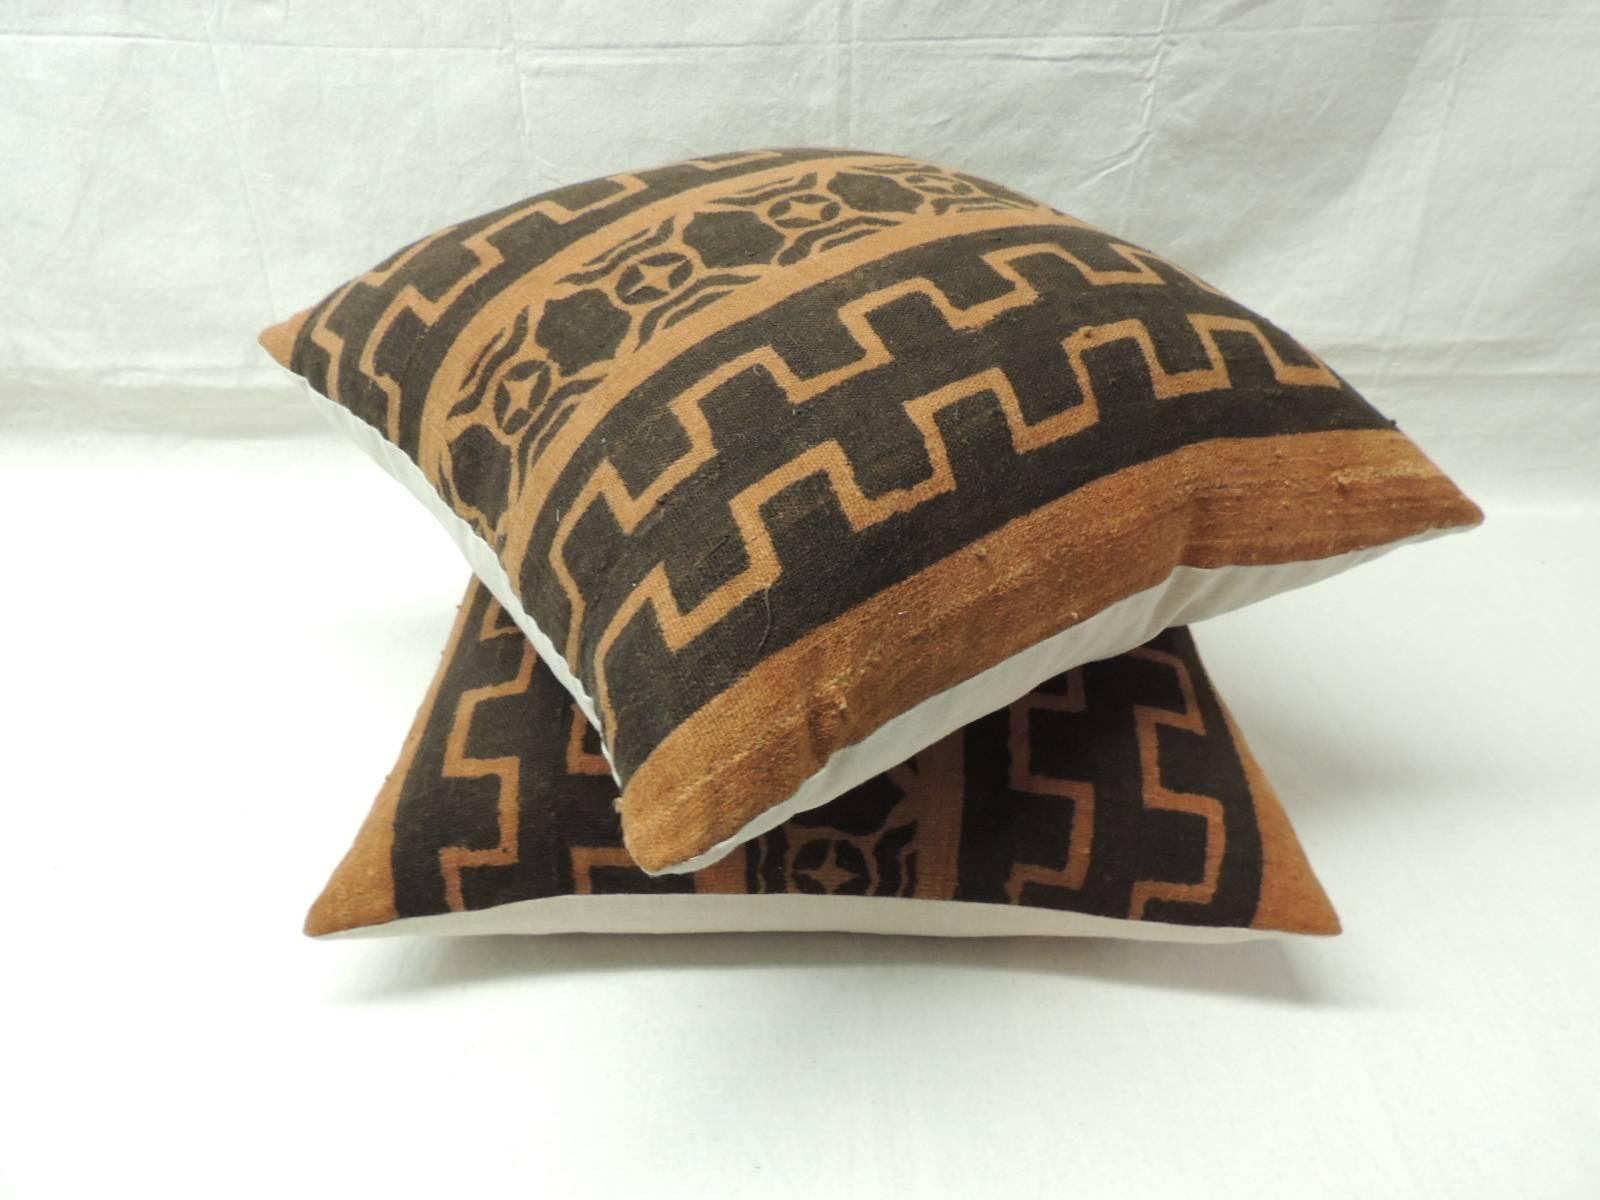 Pair of vintage African pillows with tribal design in a mud cloth. Traditional tribal design in shades of light and dark brown with natural textured linen backing. Handcrafted and designed in the USA with custom-made pillow inserts. Closed by hand